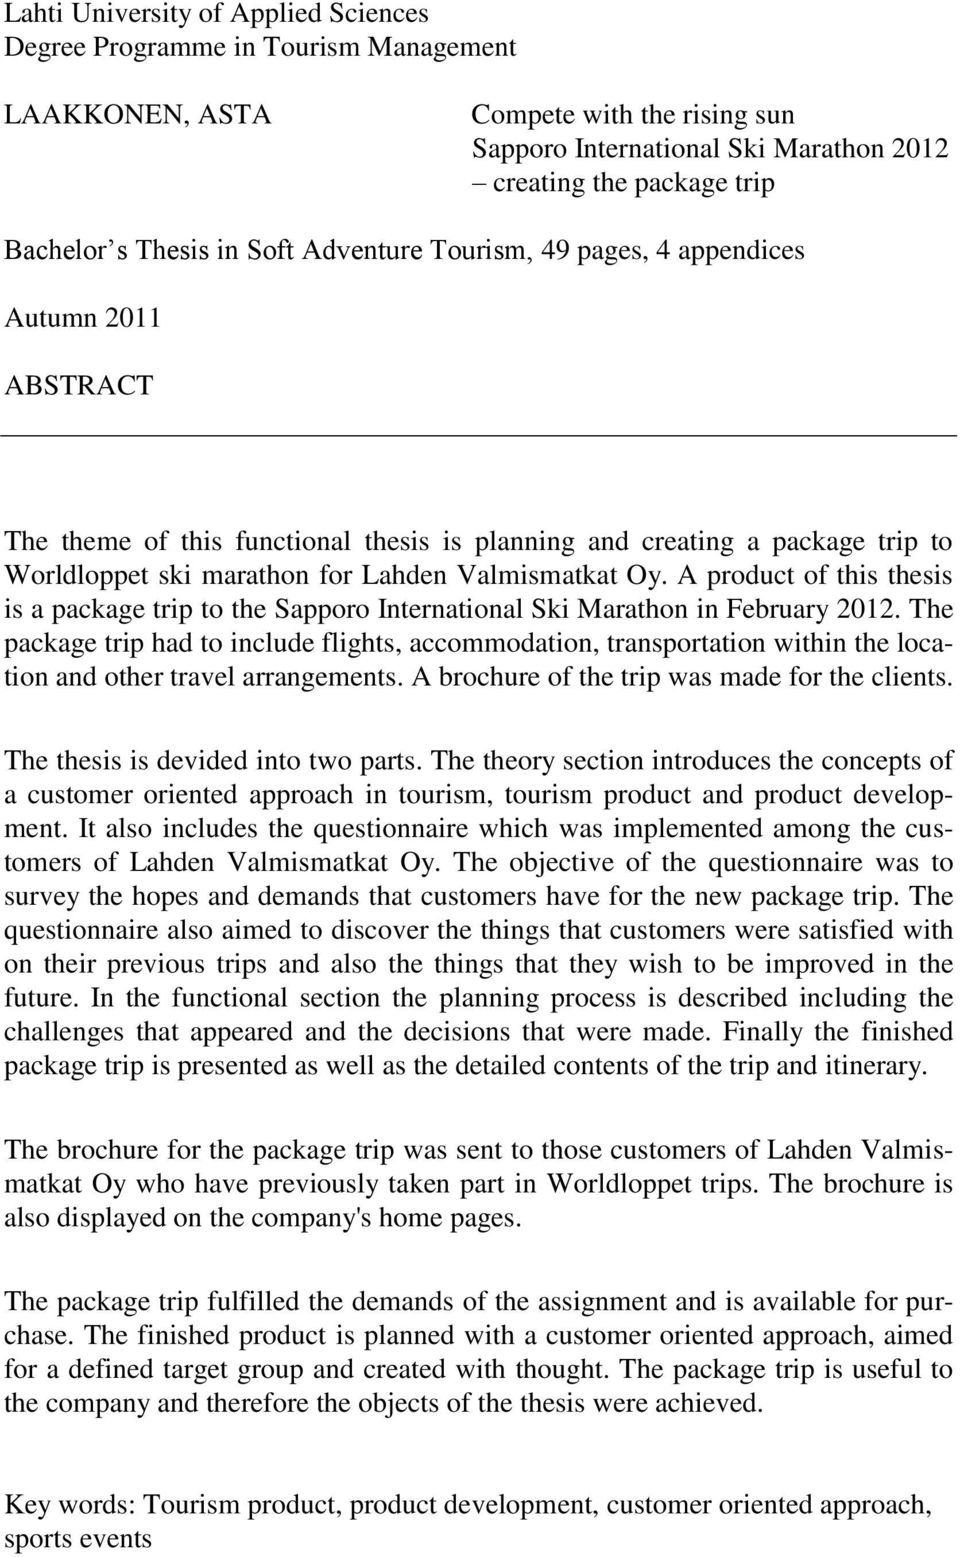 Valmismatkat Oy. A product of this thesis is a package trip to the Sapporo International Ski Marathon in February 2012.